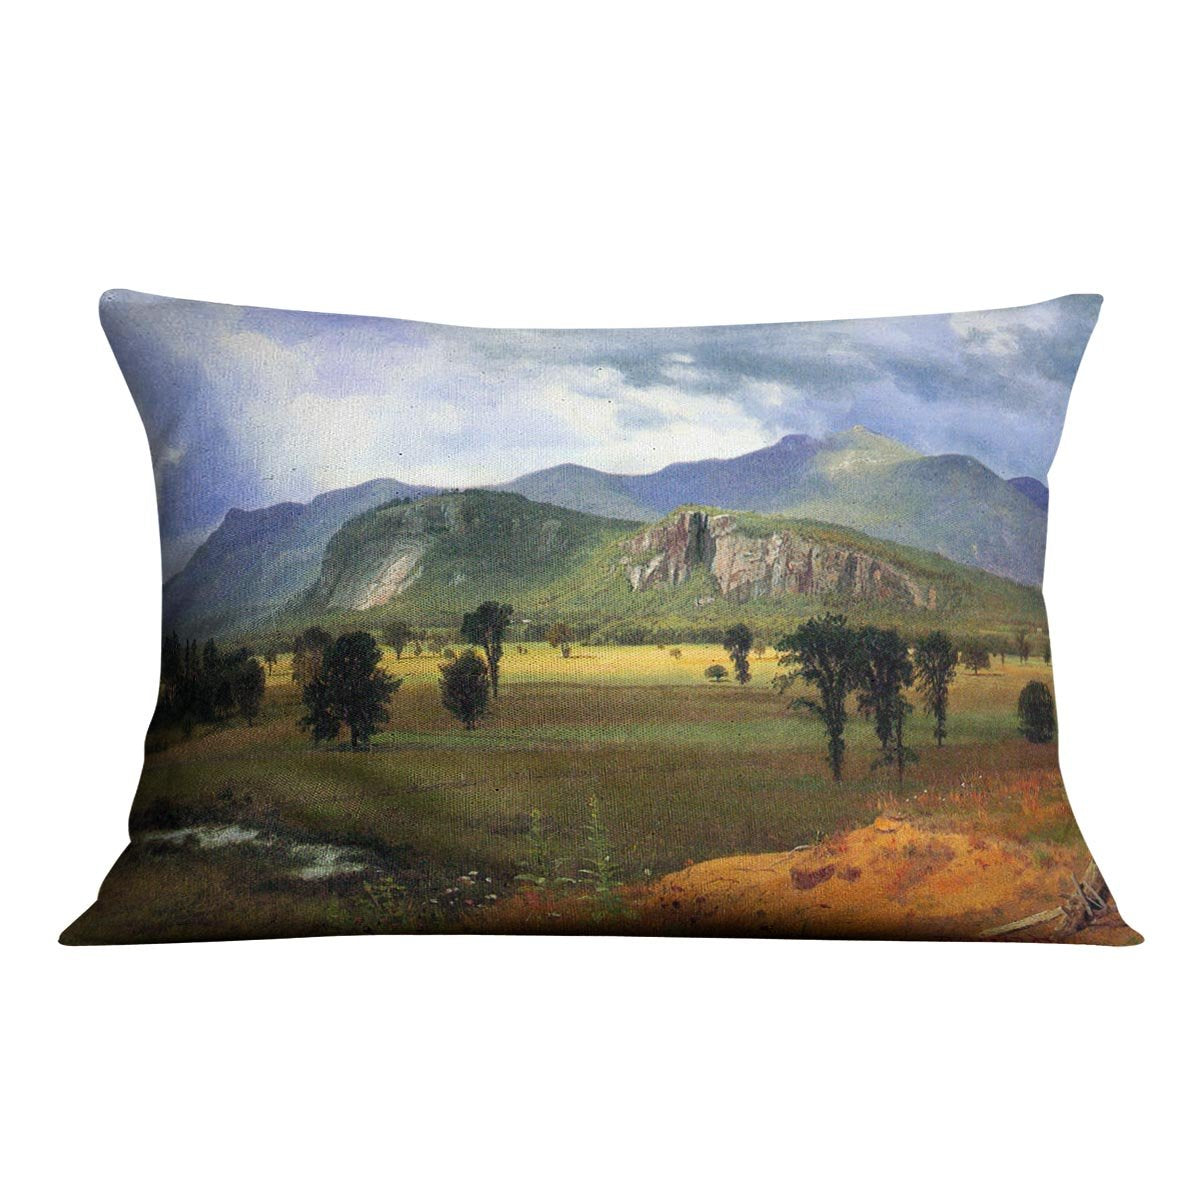 Moat Mountain Intervale New Hampshire by Bierstadt Cushion - Canvas Art Rocks - 4